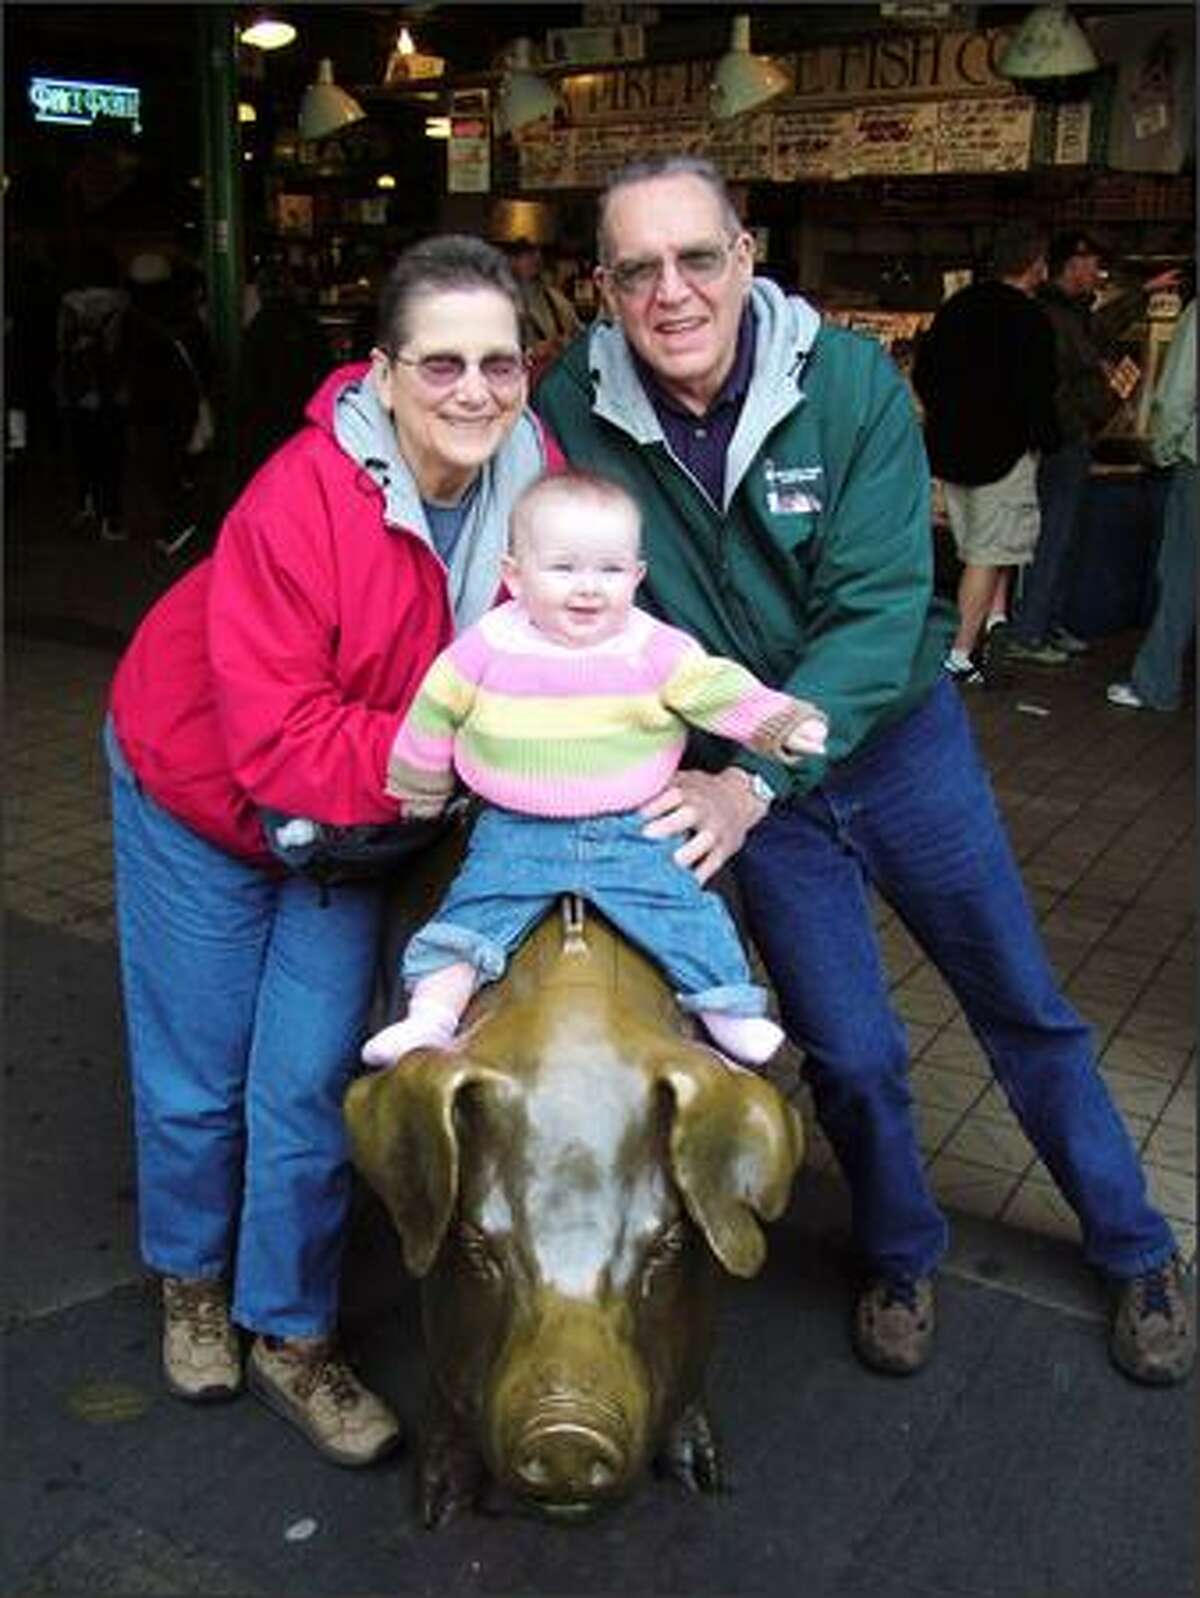 Maddie and her grandparents (submitted by ktcrabtree).